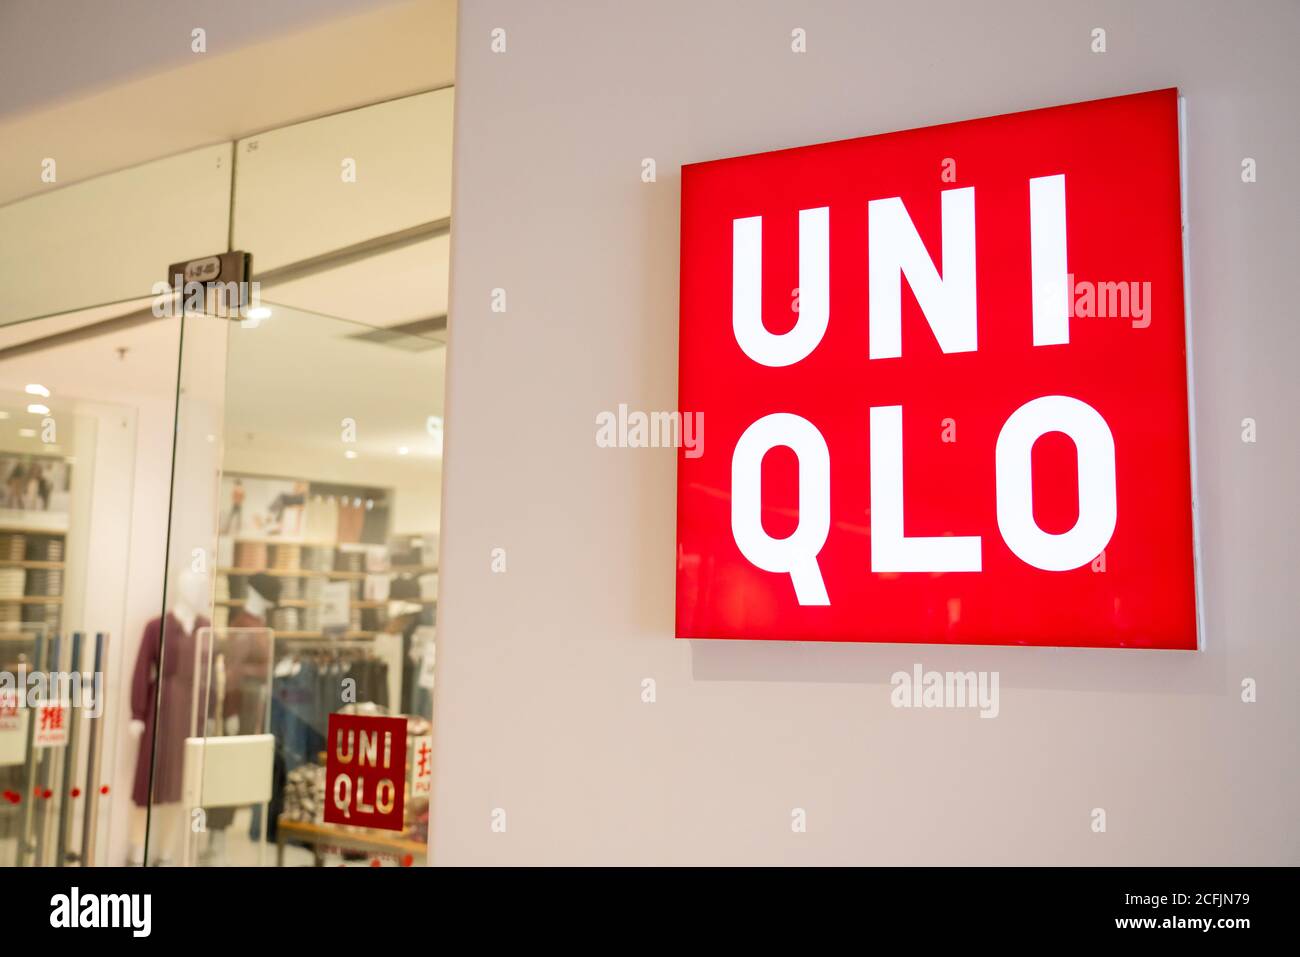 Japanese casual wear designer and manufacturer, Uniqlo logo seen in  Chongqing Stock Photo - Alamy